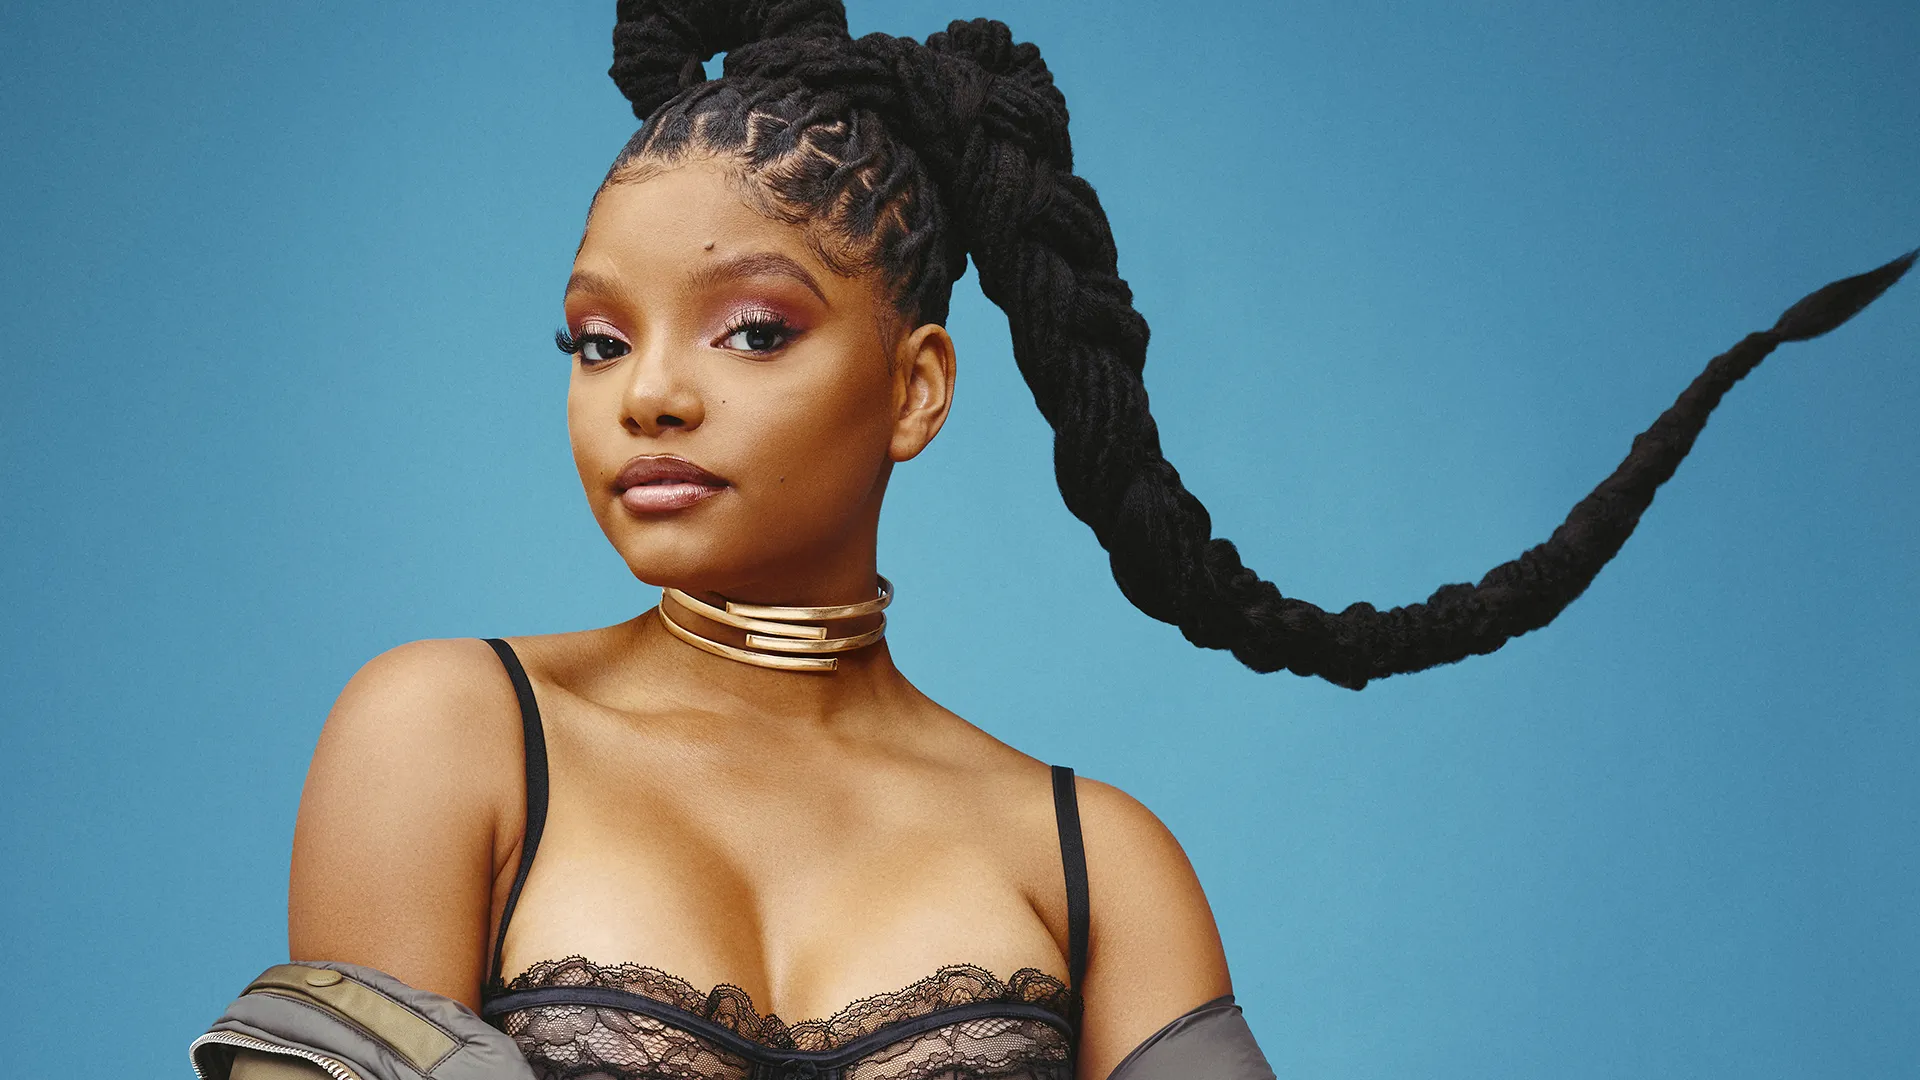 What Can We Expect From Halle Bailey’s New Music